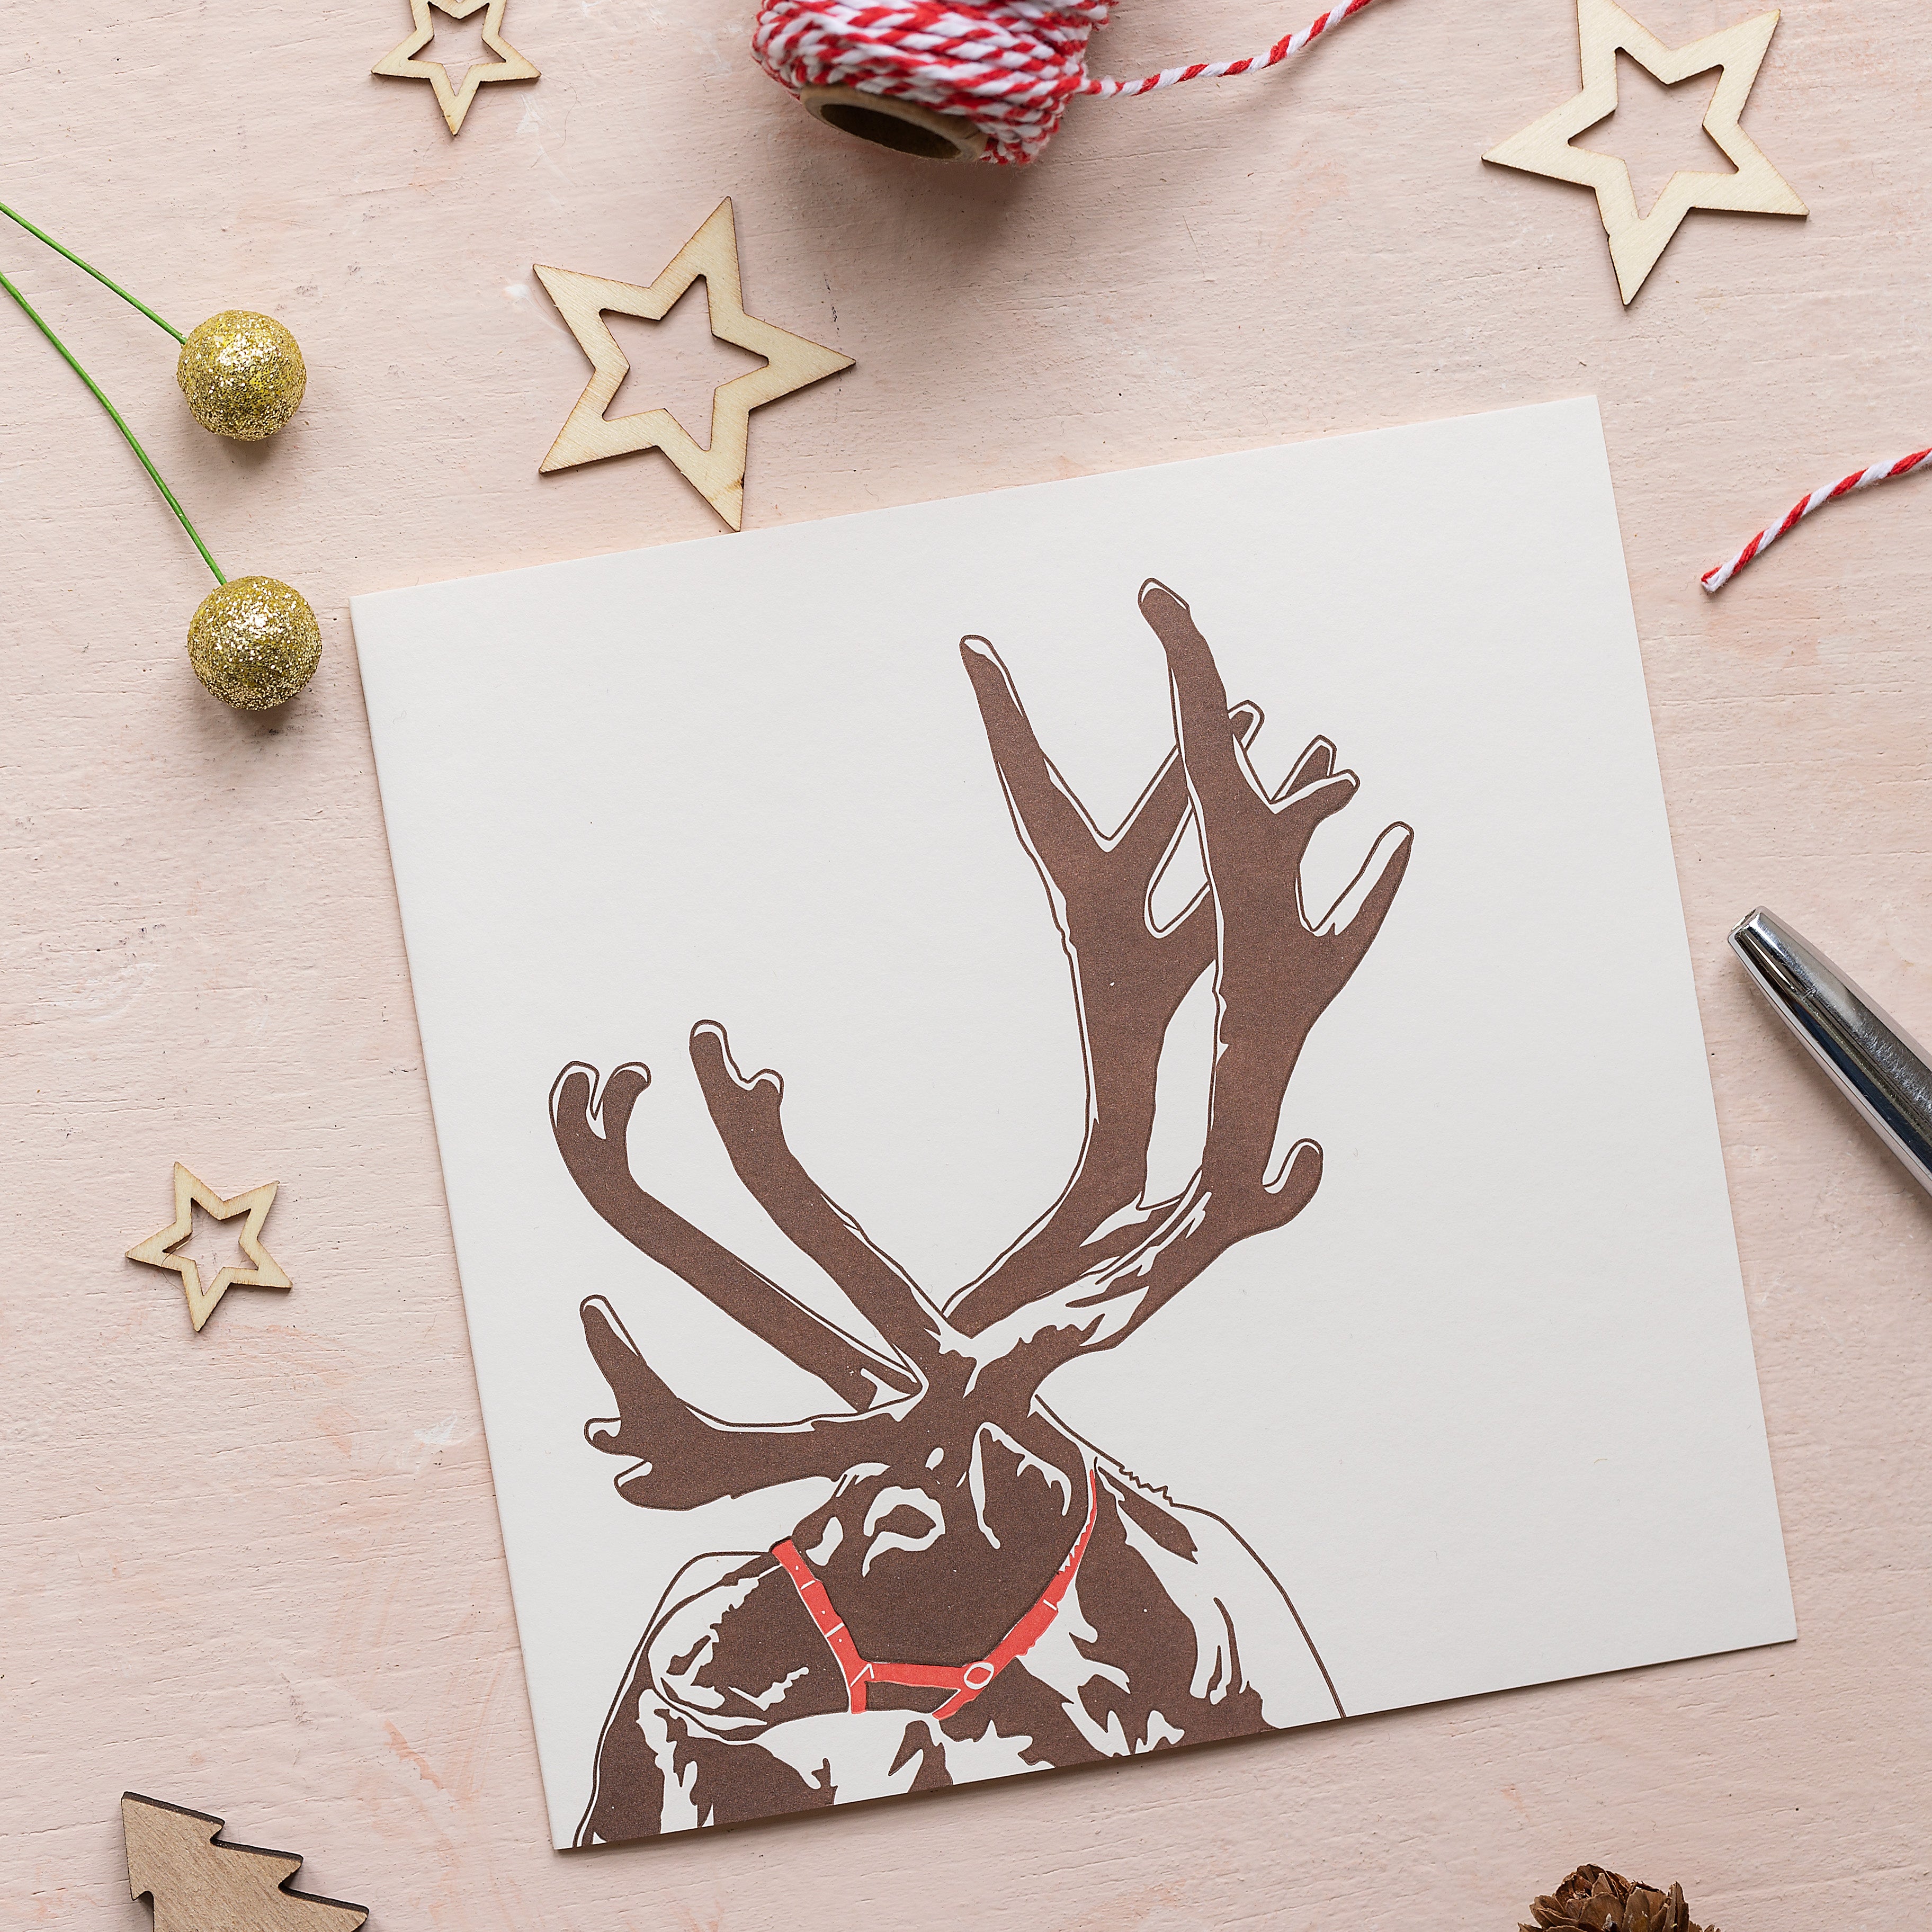 A white card with brown reindeer head and antlers sits on a table scattered with gold Christmas stars